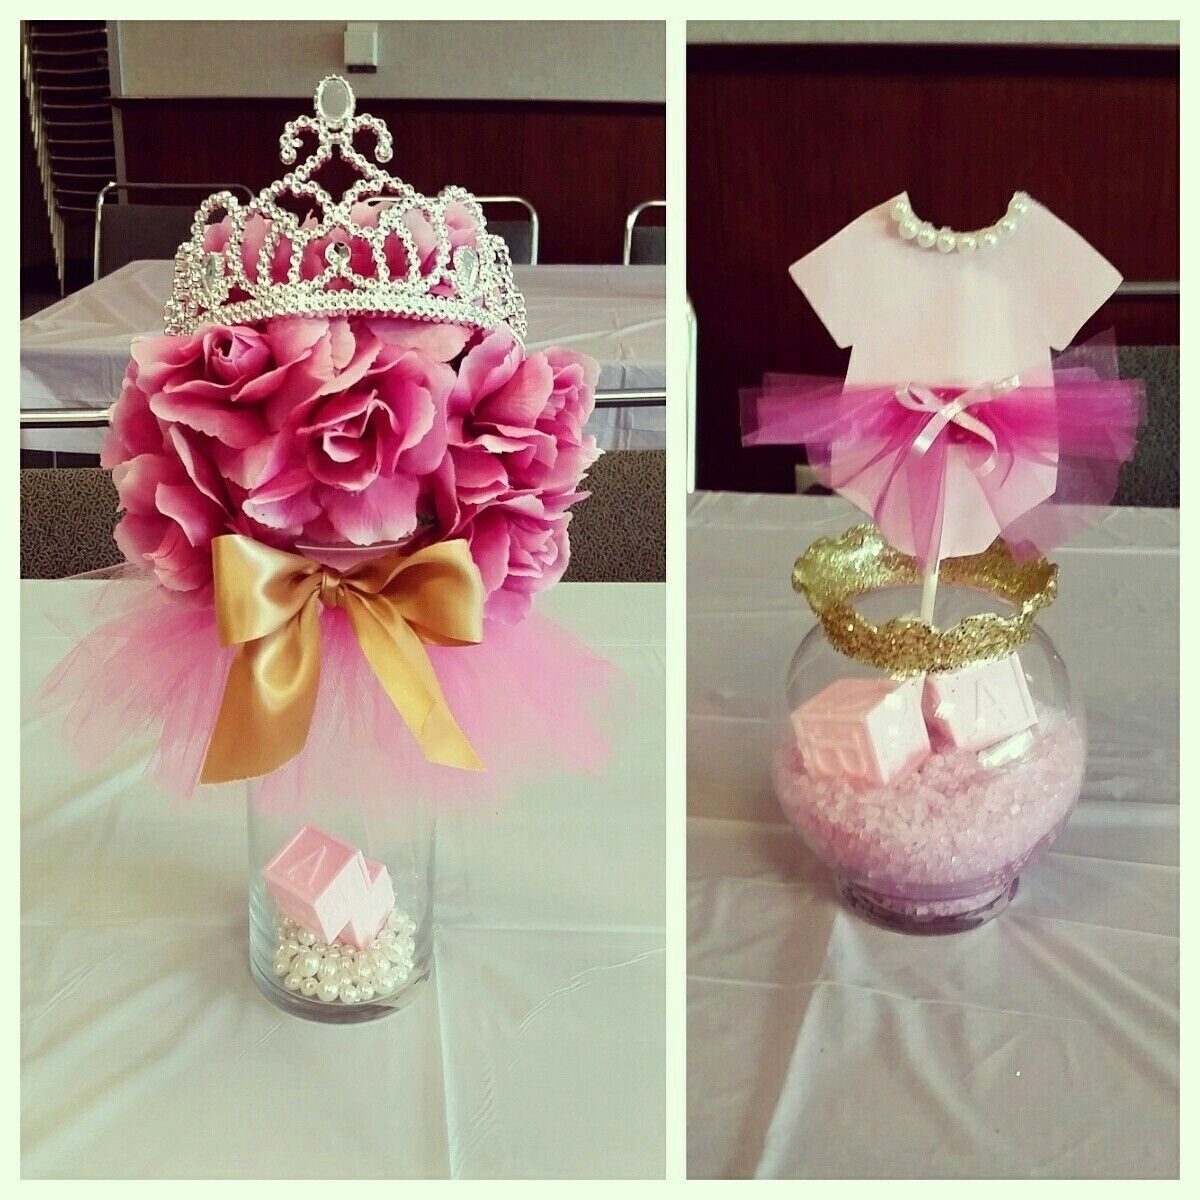 10 Gorgeous Baby Shower Centerpieces For Girl Ideas pinjessica hannah on baby shower ideas pinterest babies 2022